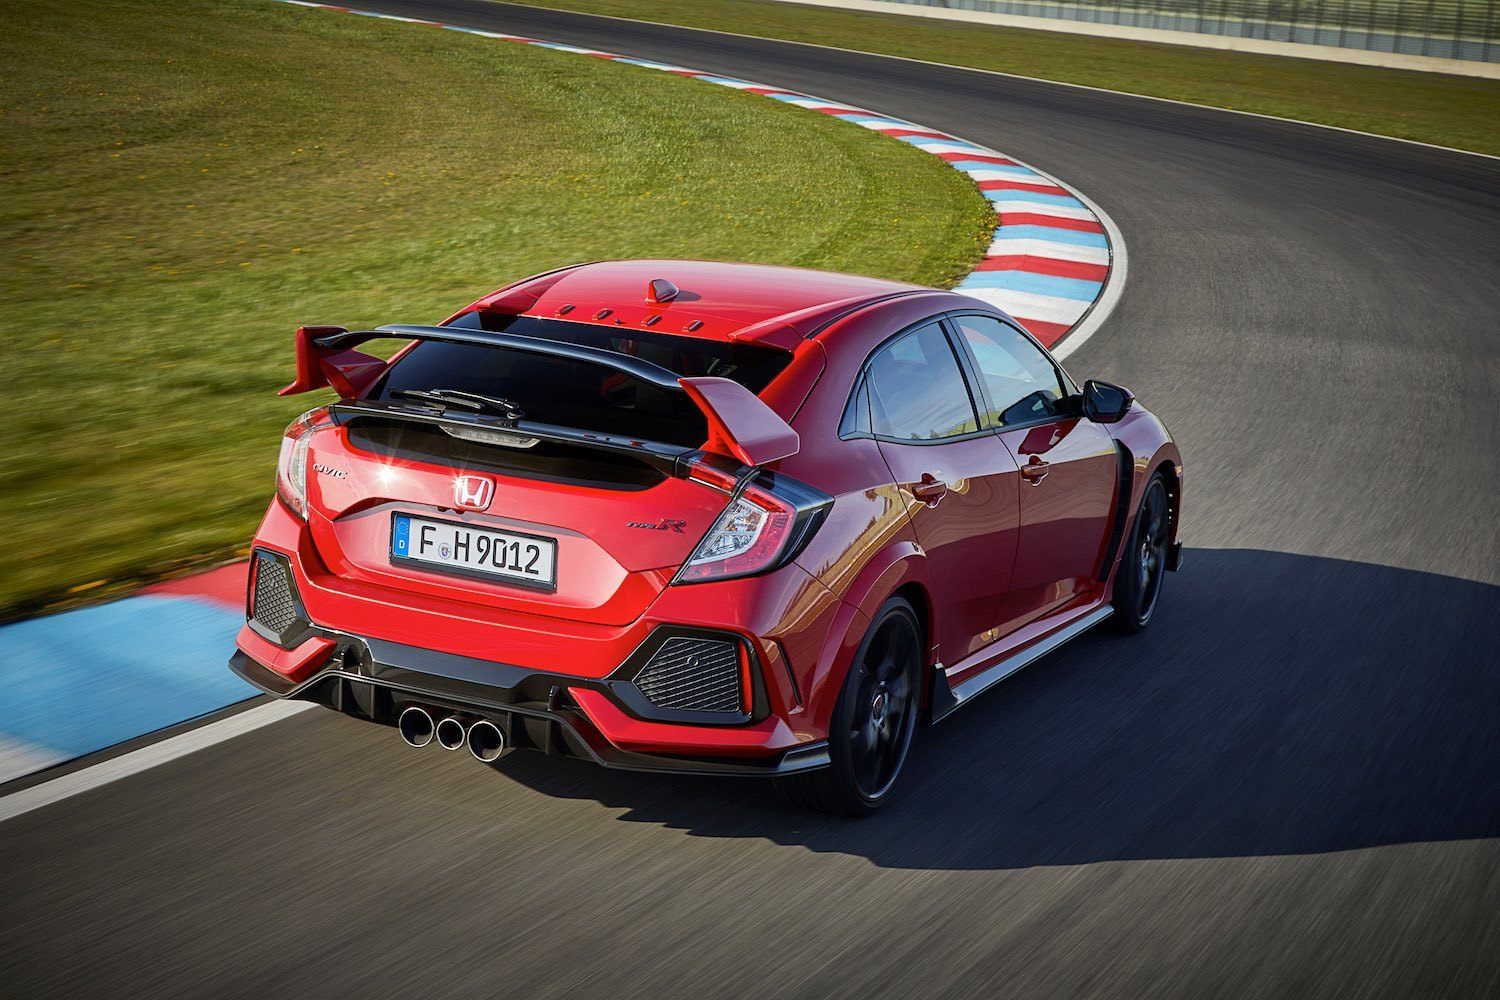 Tim Barnes-Clay reviews the 2018 Honda Civic Type R at the first drives 8